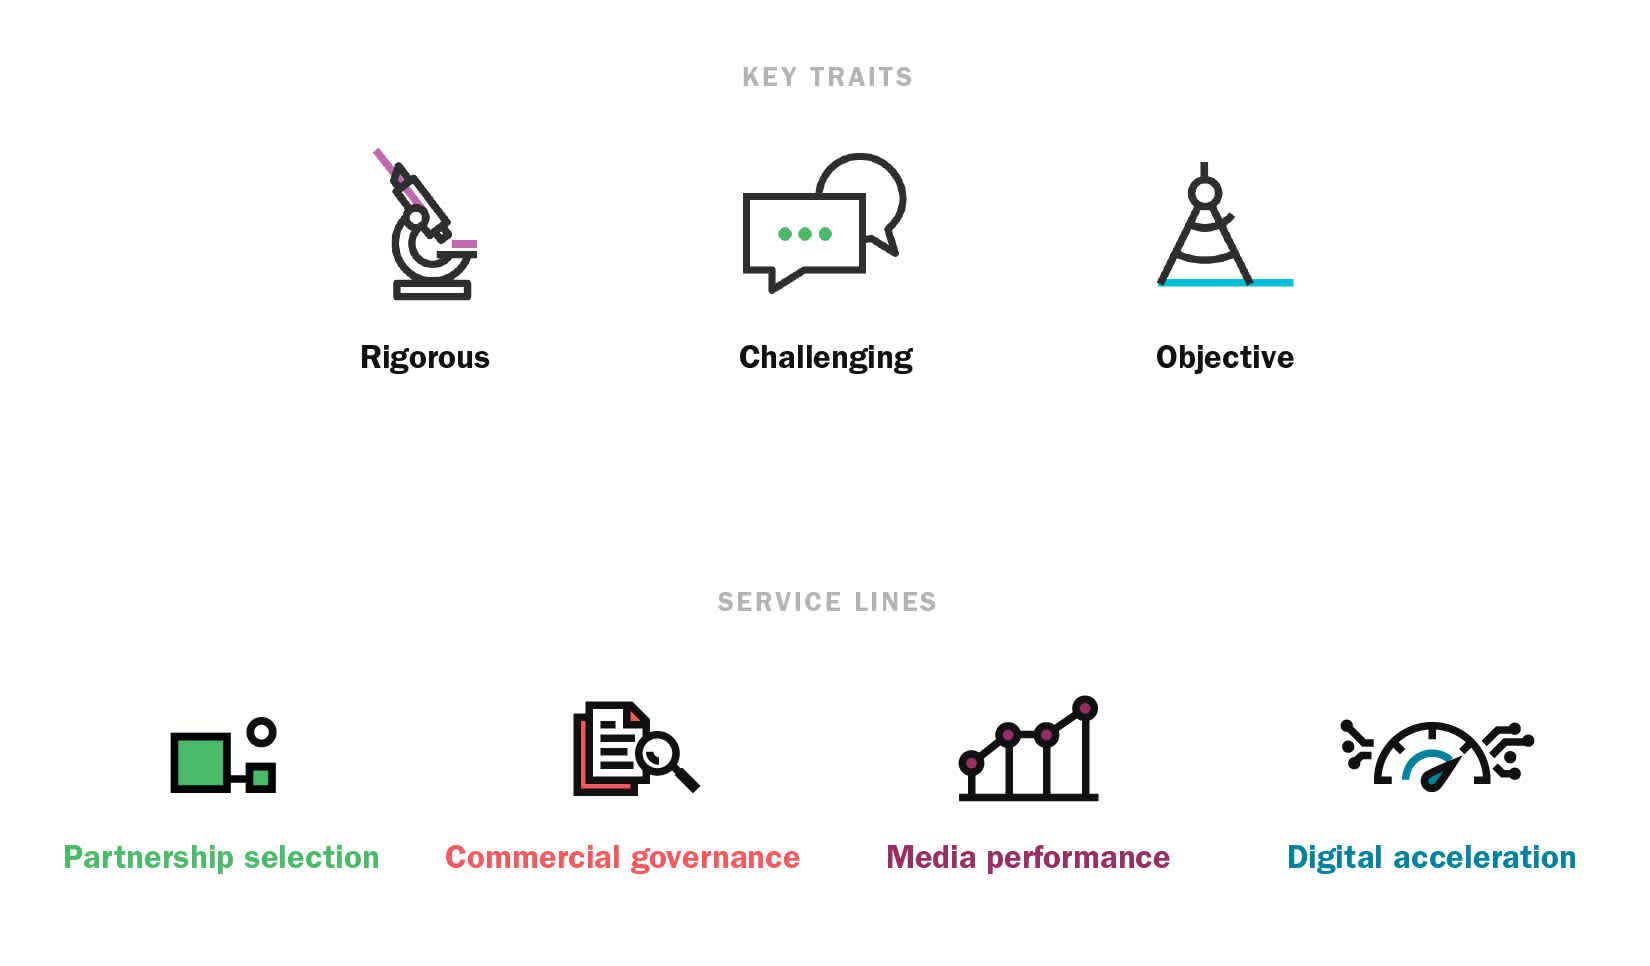 Icons created for the MediaSense brand, illustrating key traits and service lines